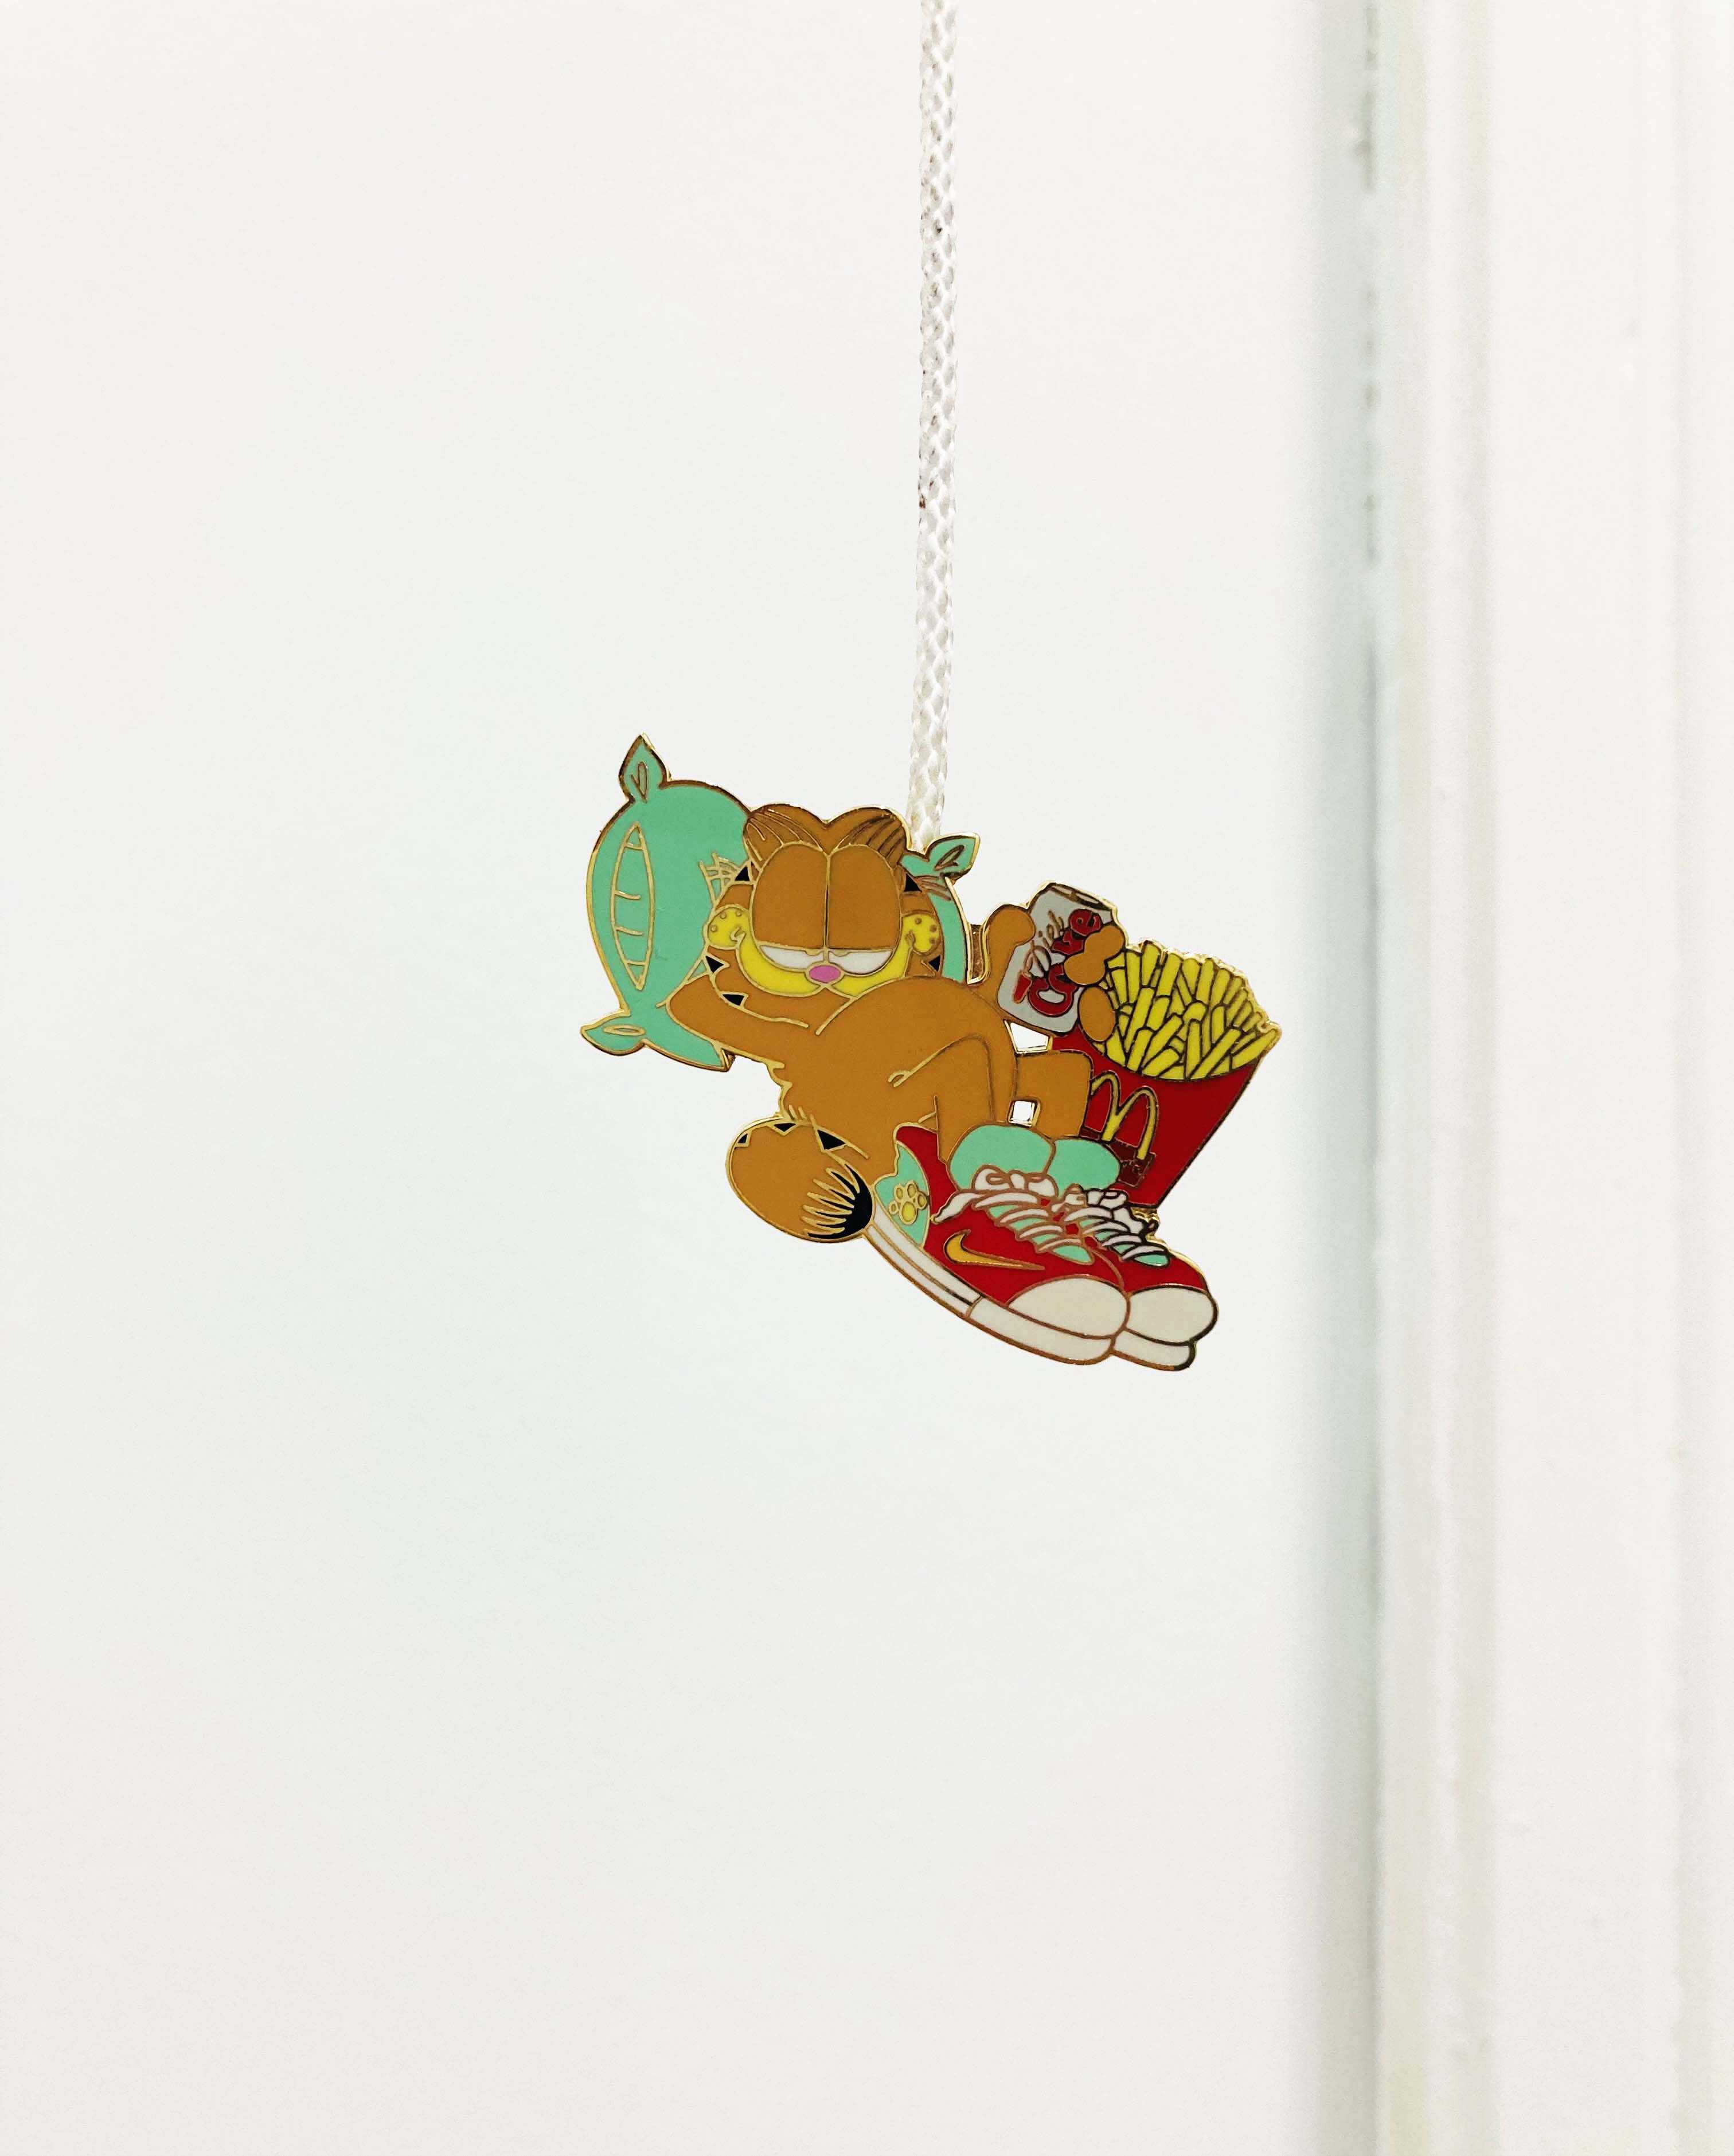 Garfield in 2D, exhibition design, ceiling pull cord llight switch and vintage Garfield Fantasy pin, environmetnal dimensions